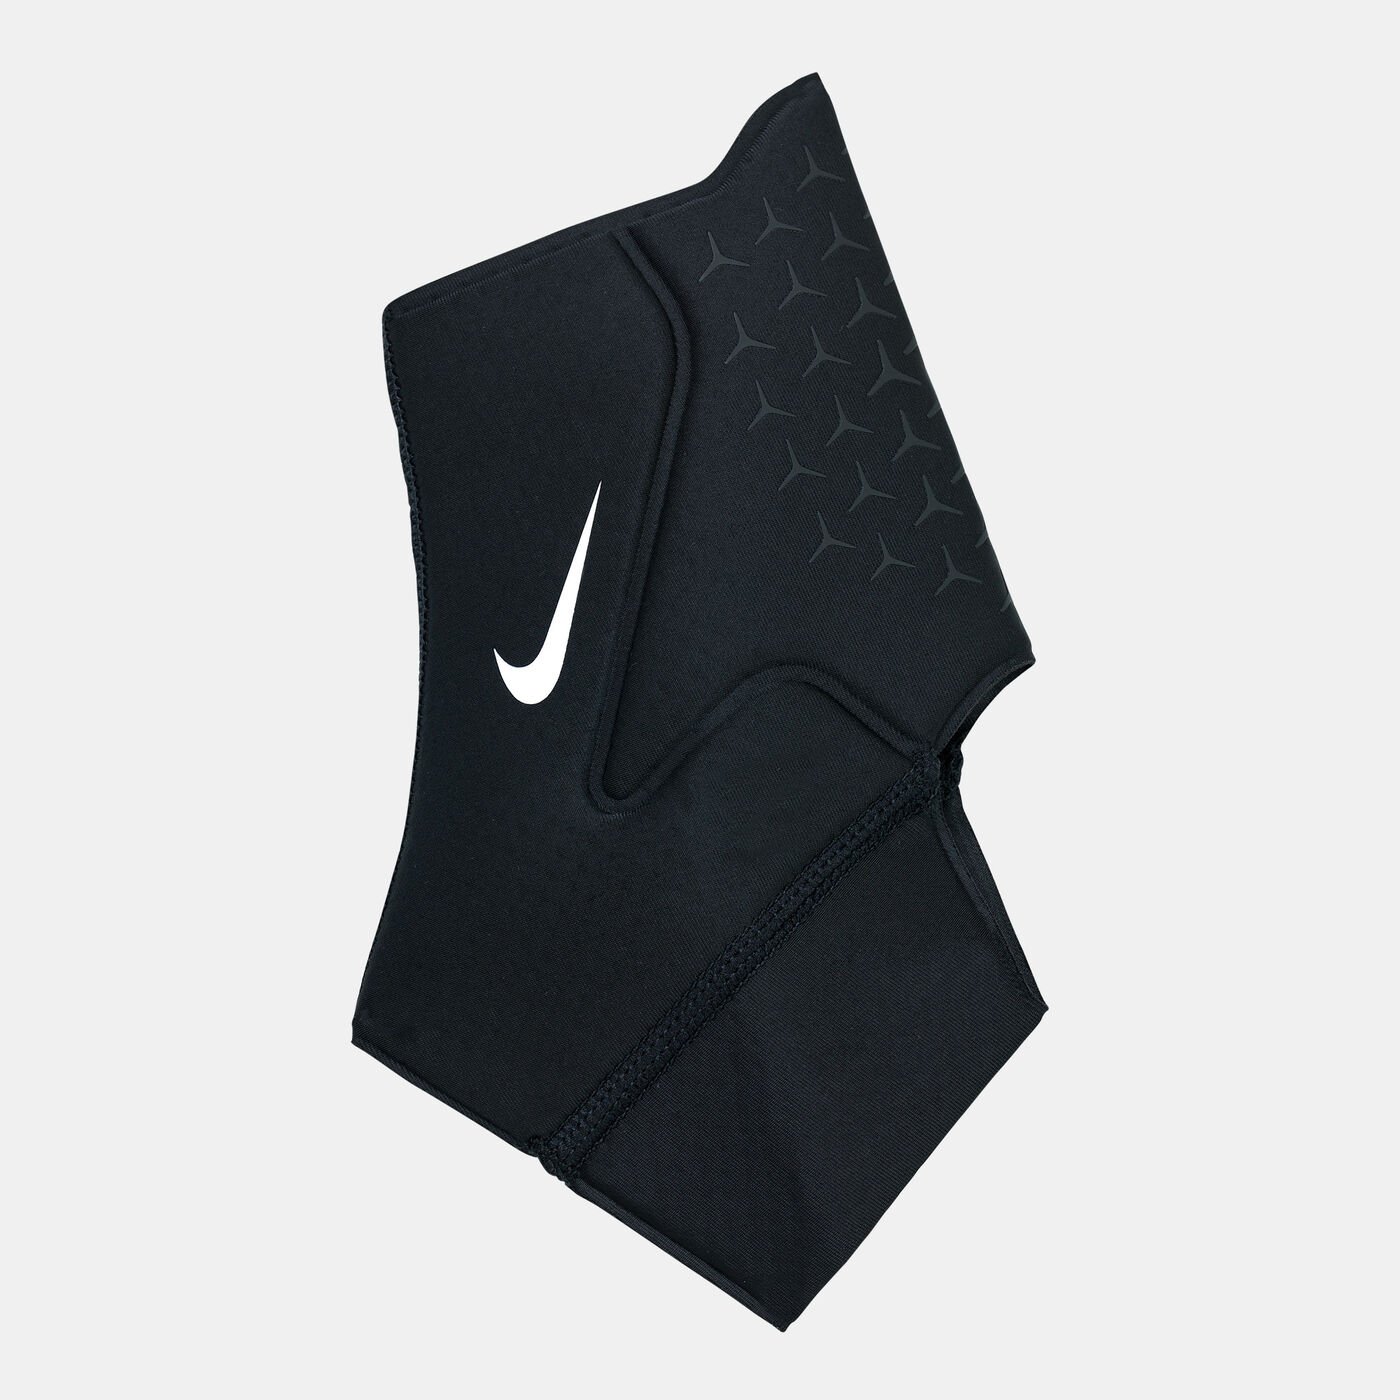 Pro 3.0 Ankle Sleeve